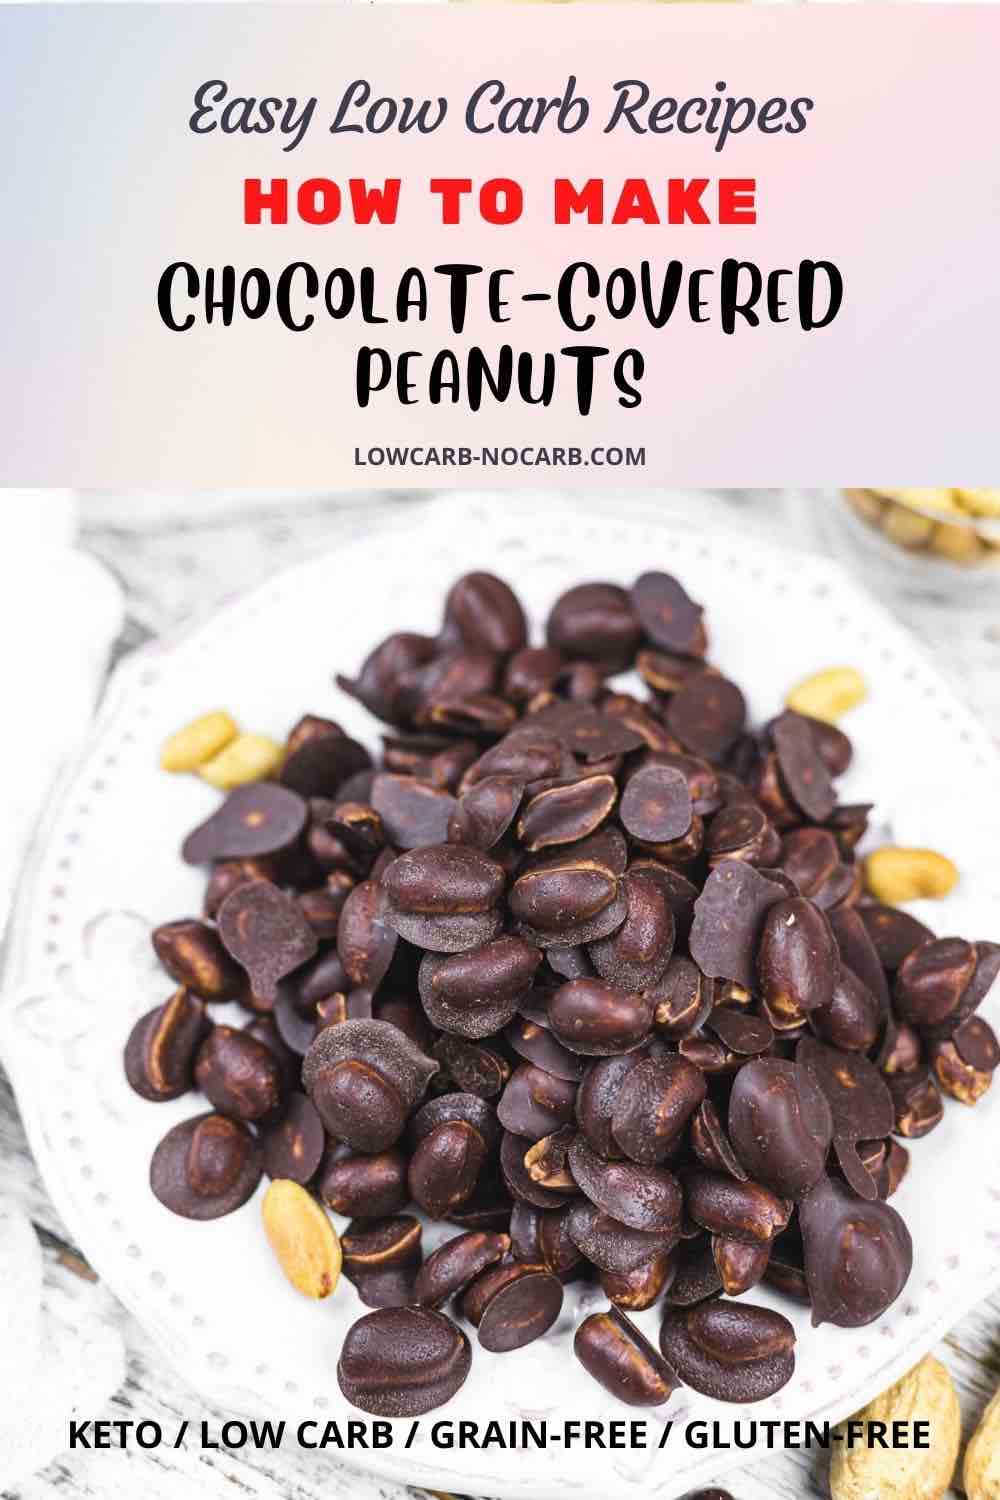 A plate of chocolate-covered peanuts with text overlay detailing a recipe for an easy, low-carb, keto, gluten-free, and grain-free version.